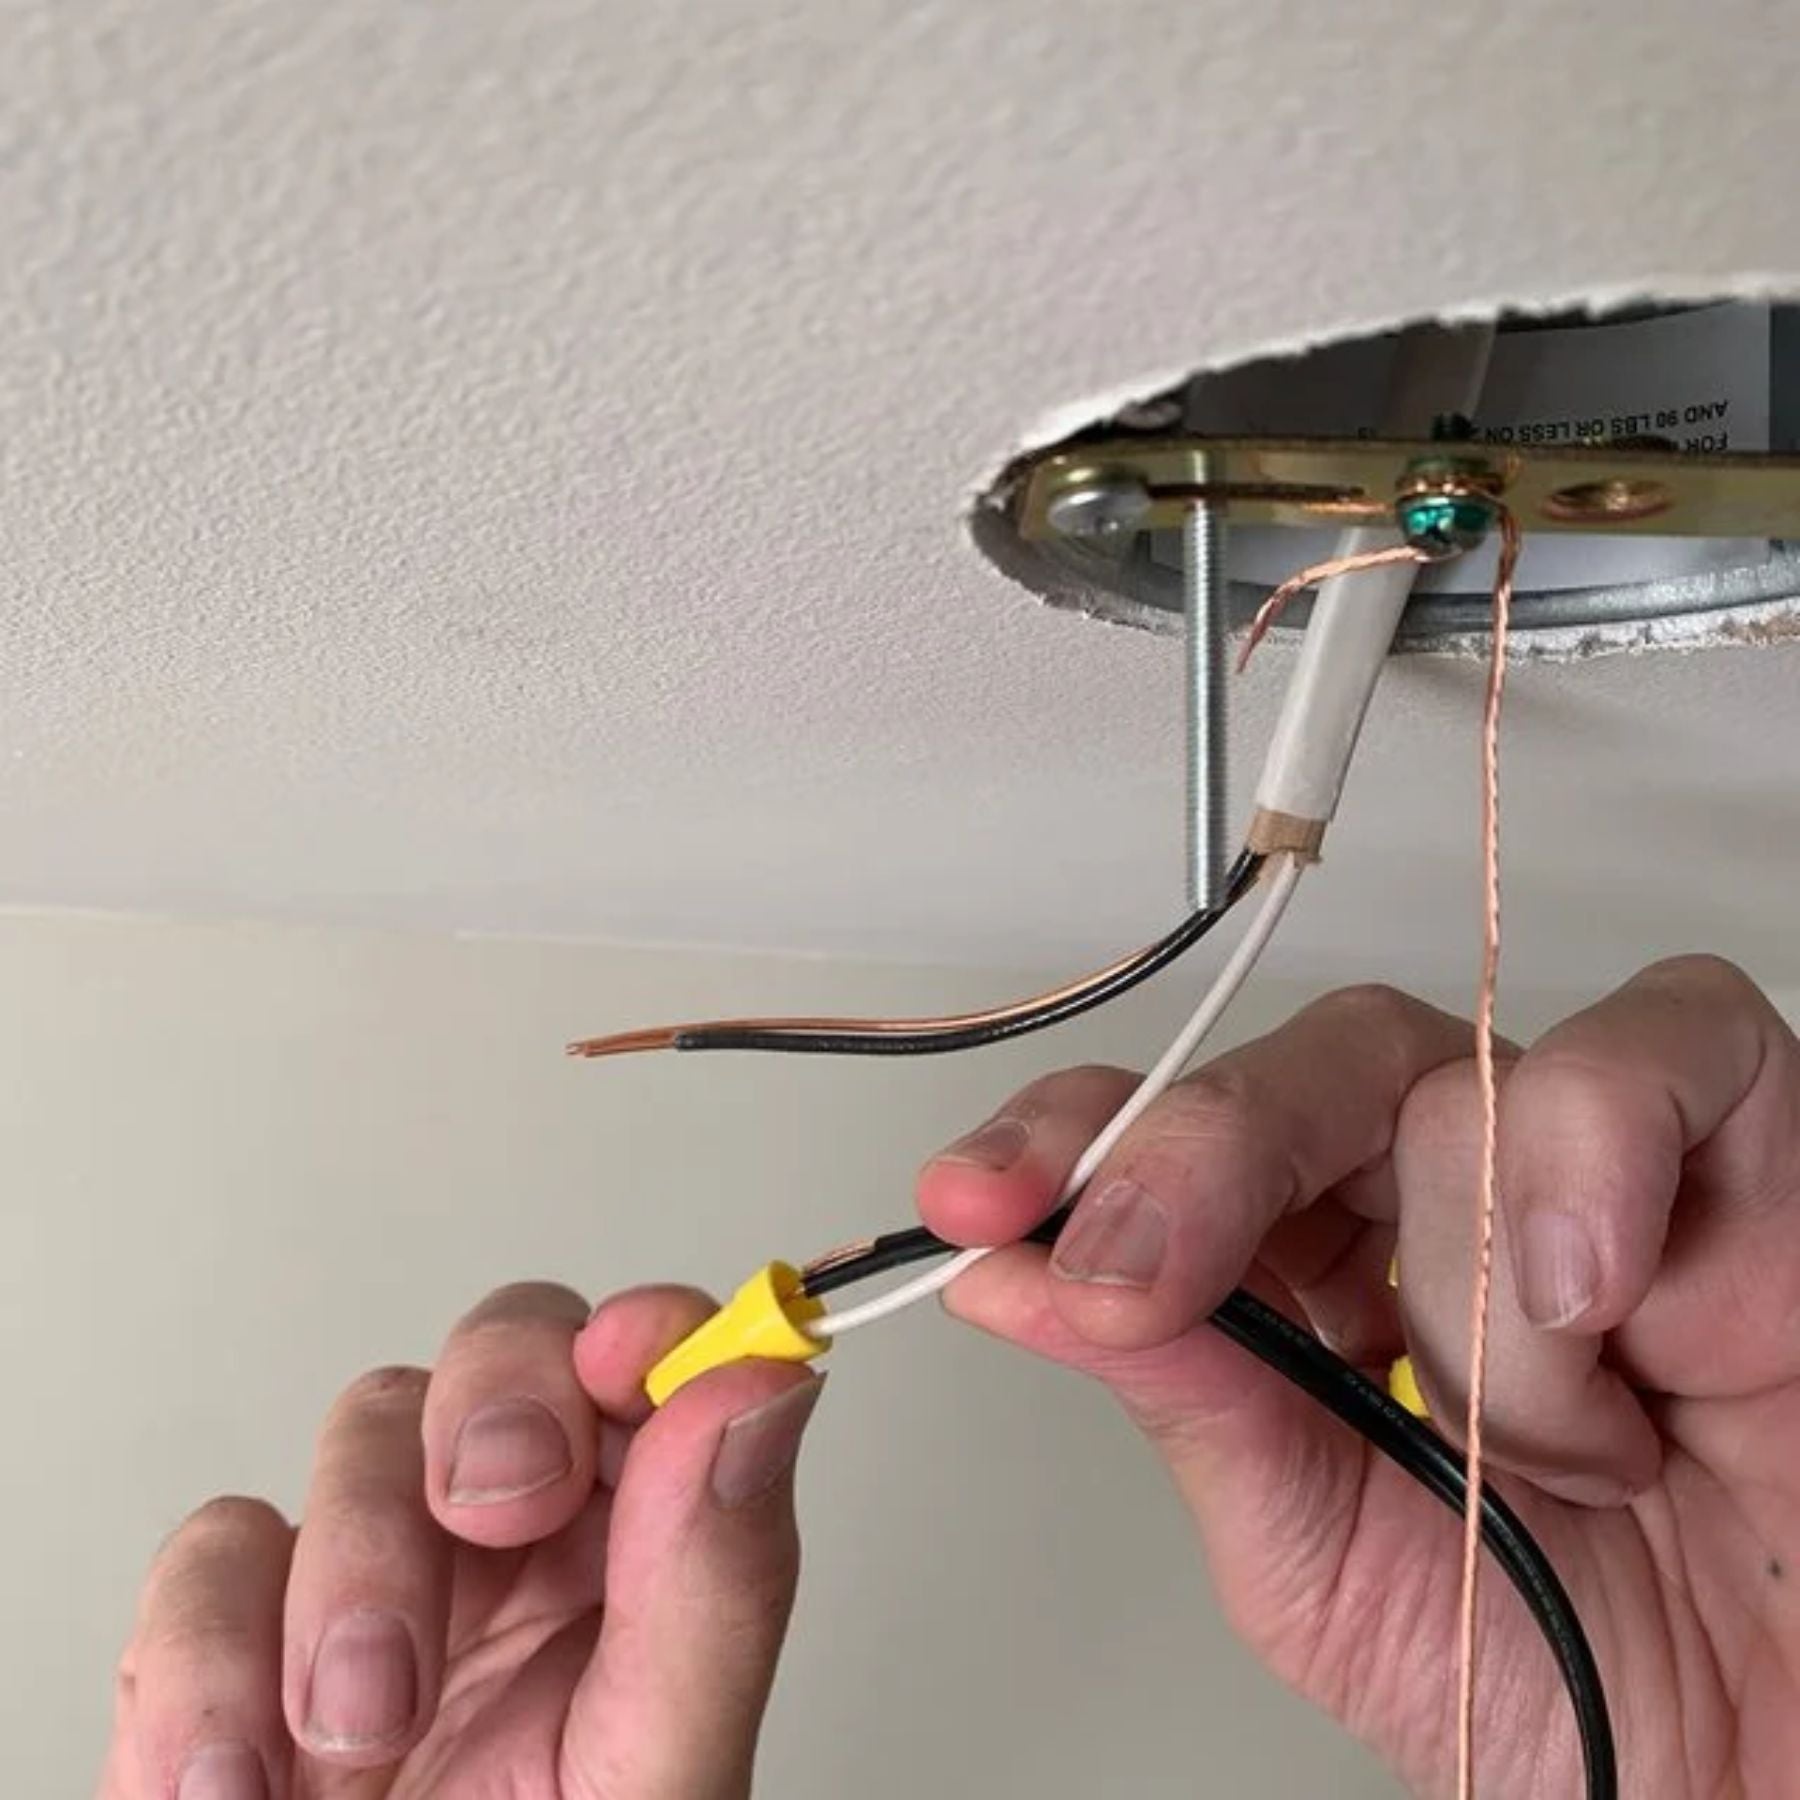 paying attention to detail ensures a safe electrical setup